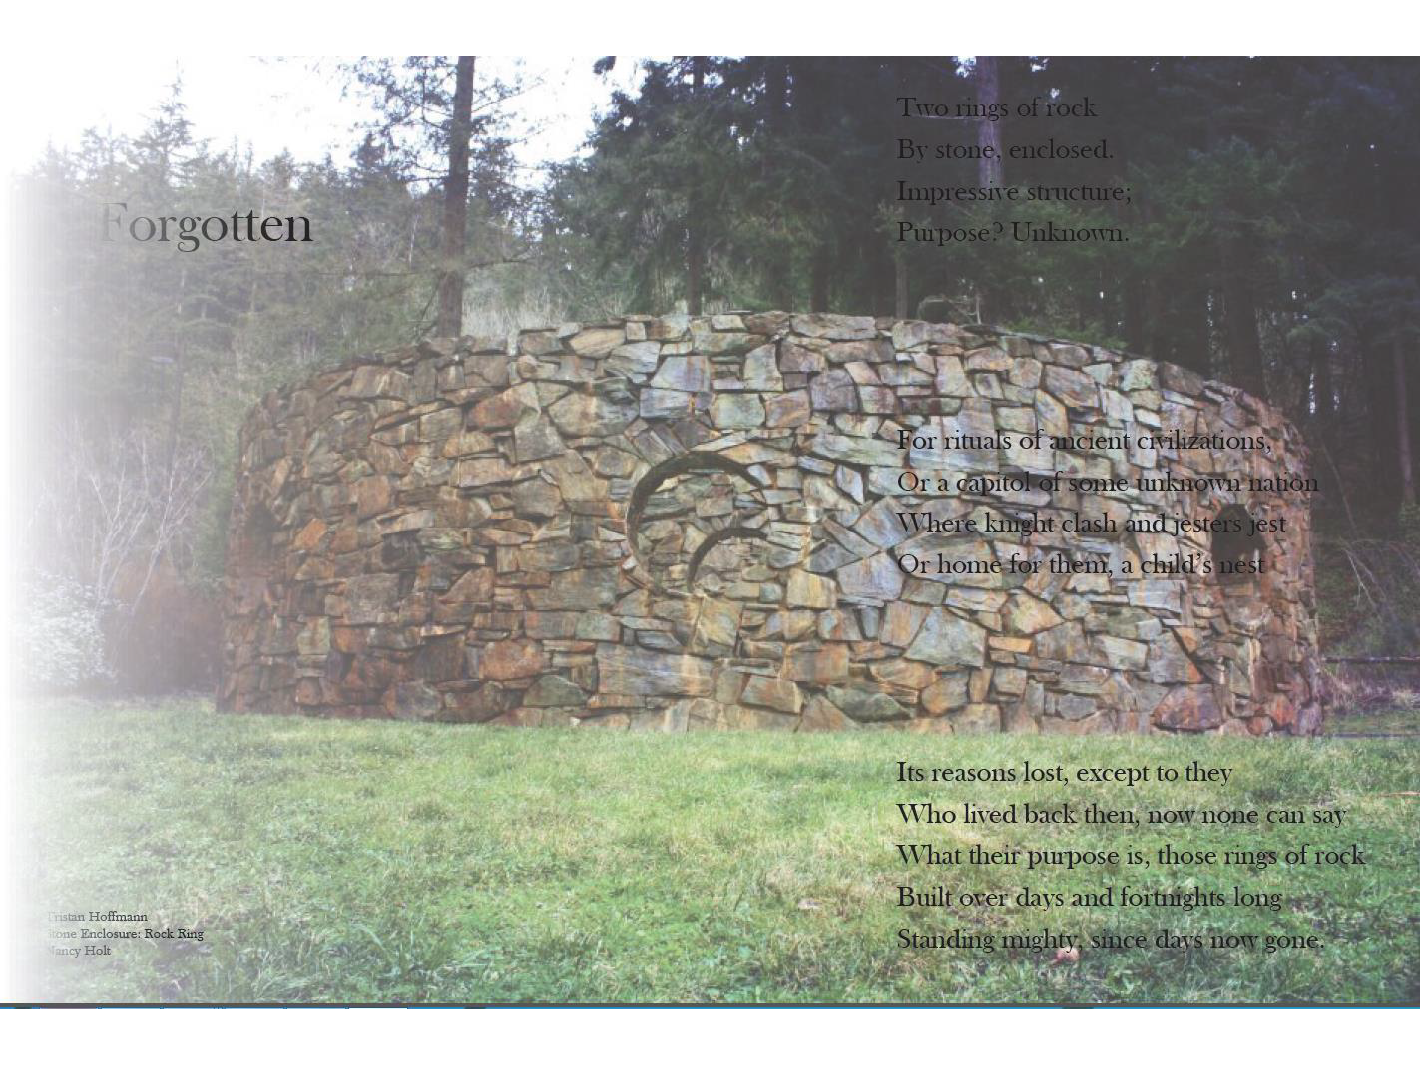 Partially faded image of the Rock Rings sculpture, with a poem overlaid